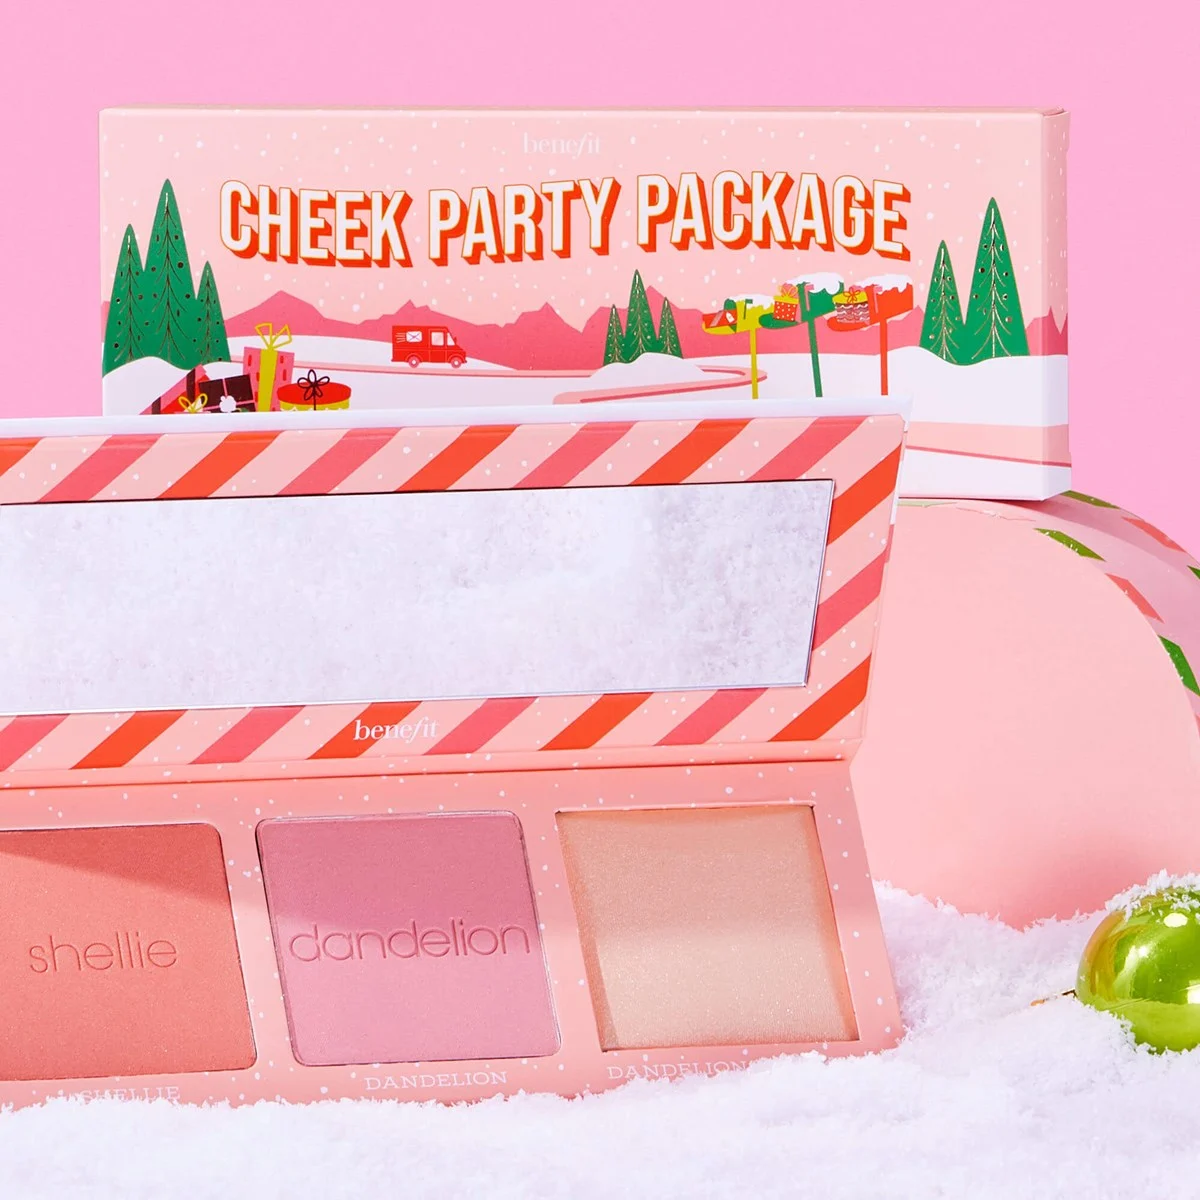 et_holiday22_cheekpartypackage_productattribute